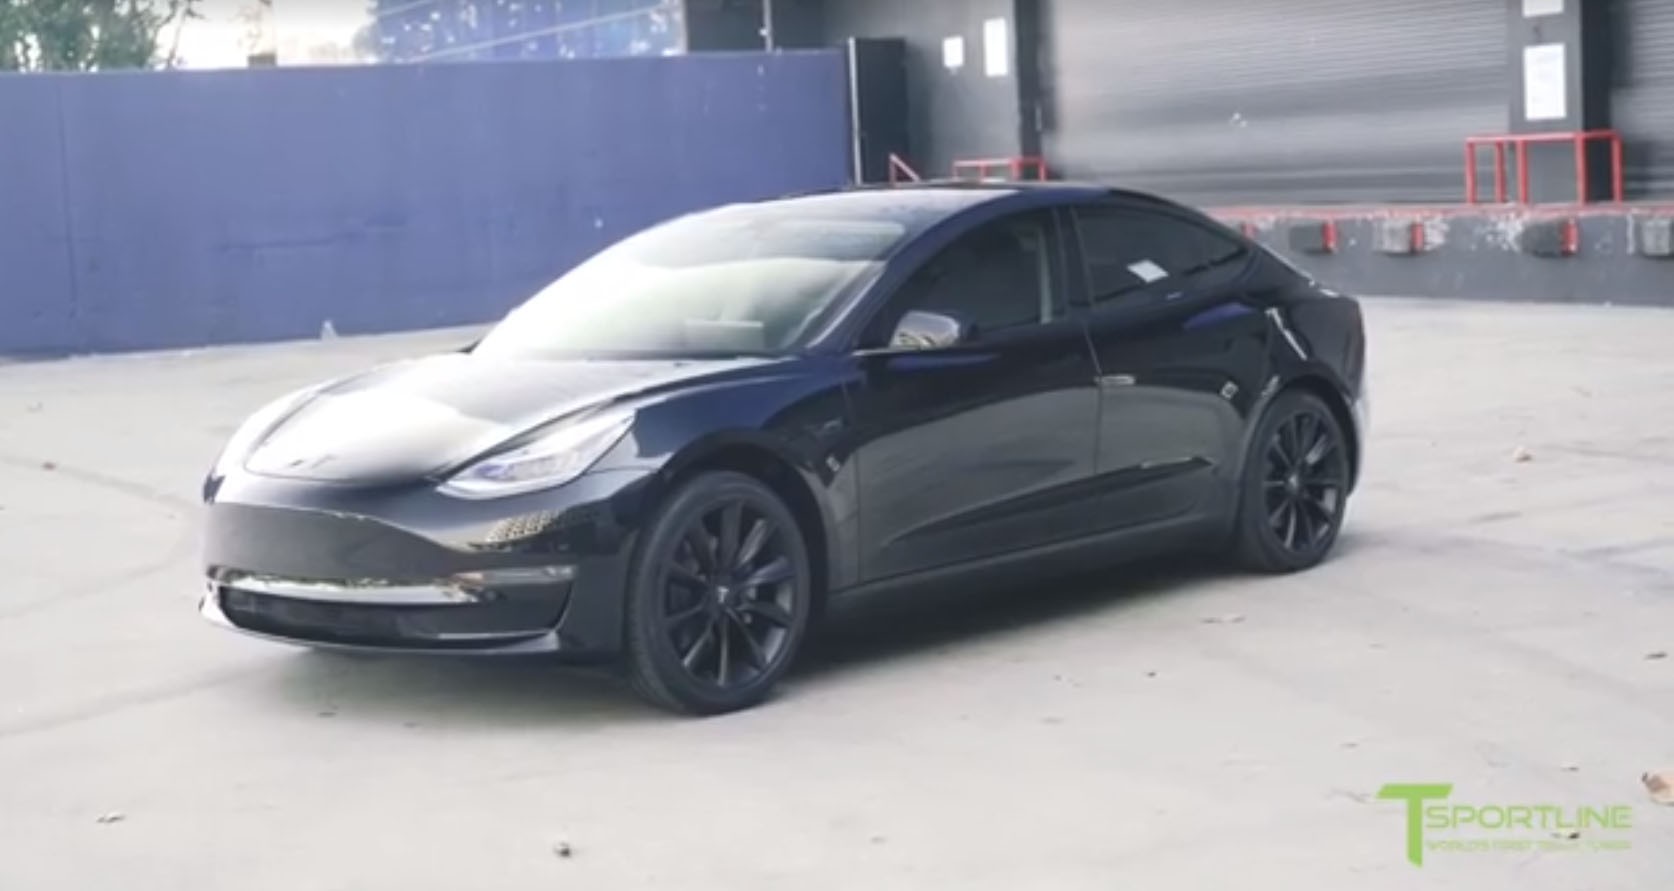 blacked out tesla model 3 looks set to do a drive by shooting